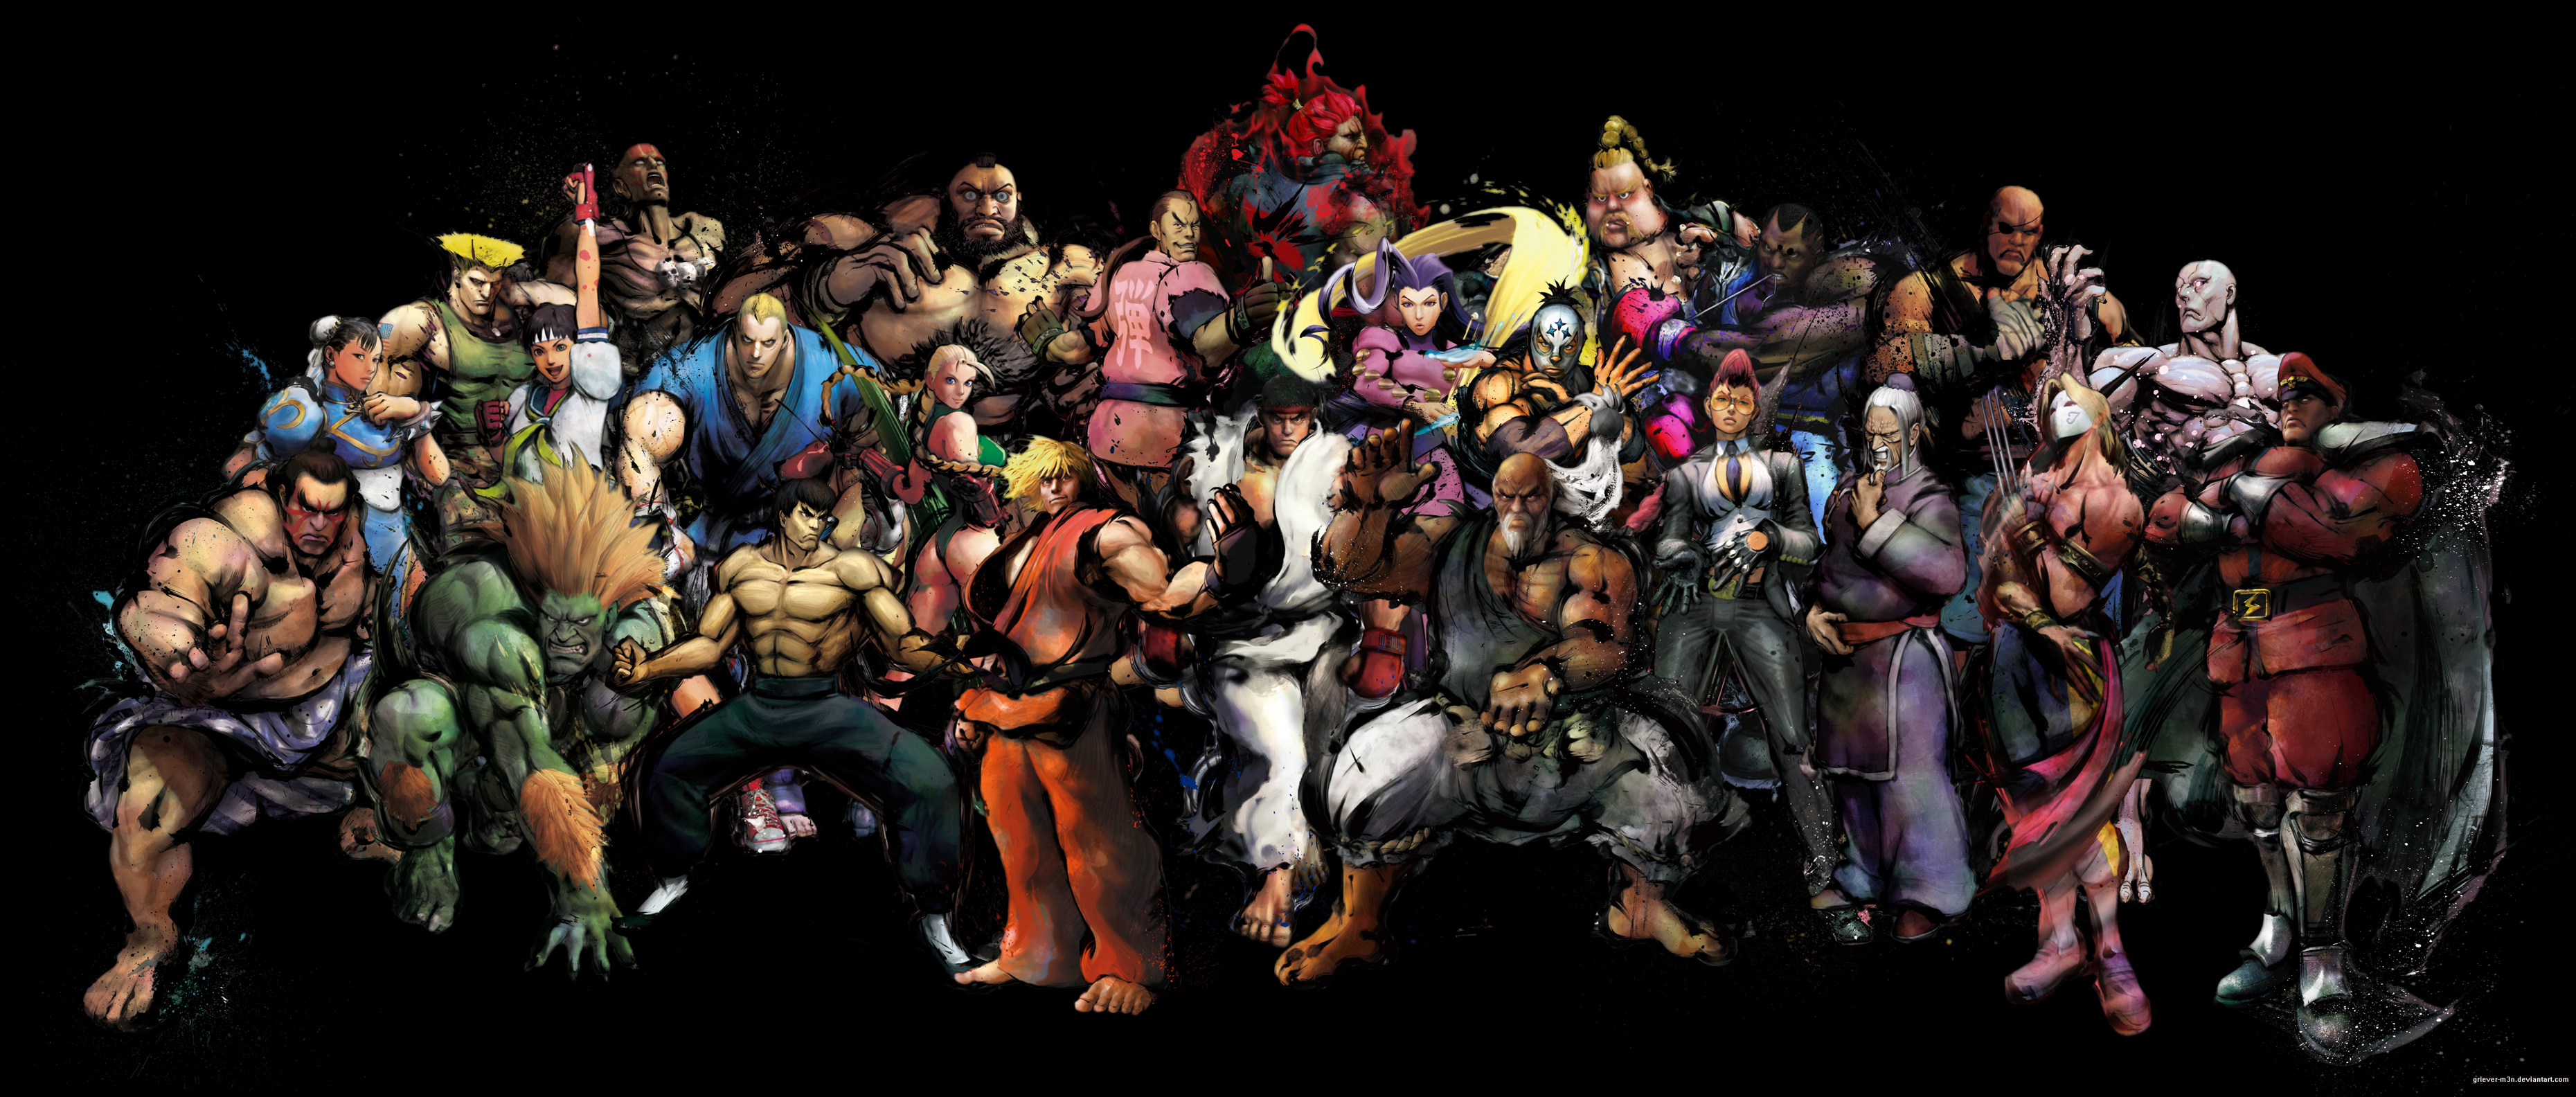 2274x2993 HD Street Fighter Wallpapers and Photos | #1697215